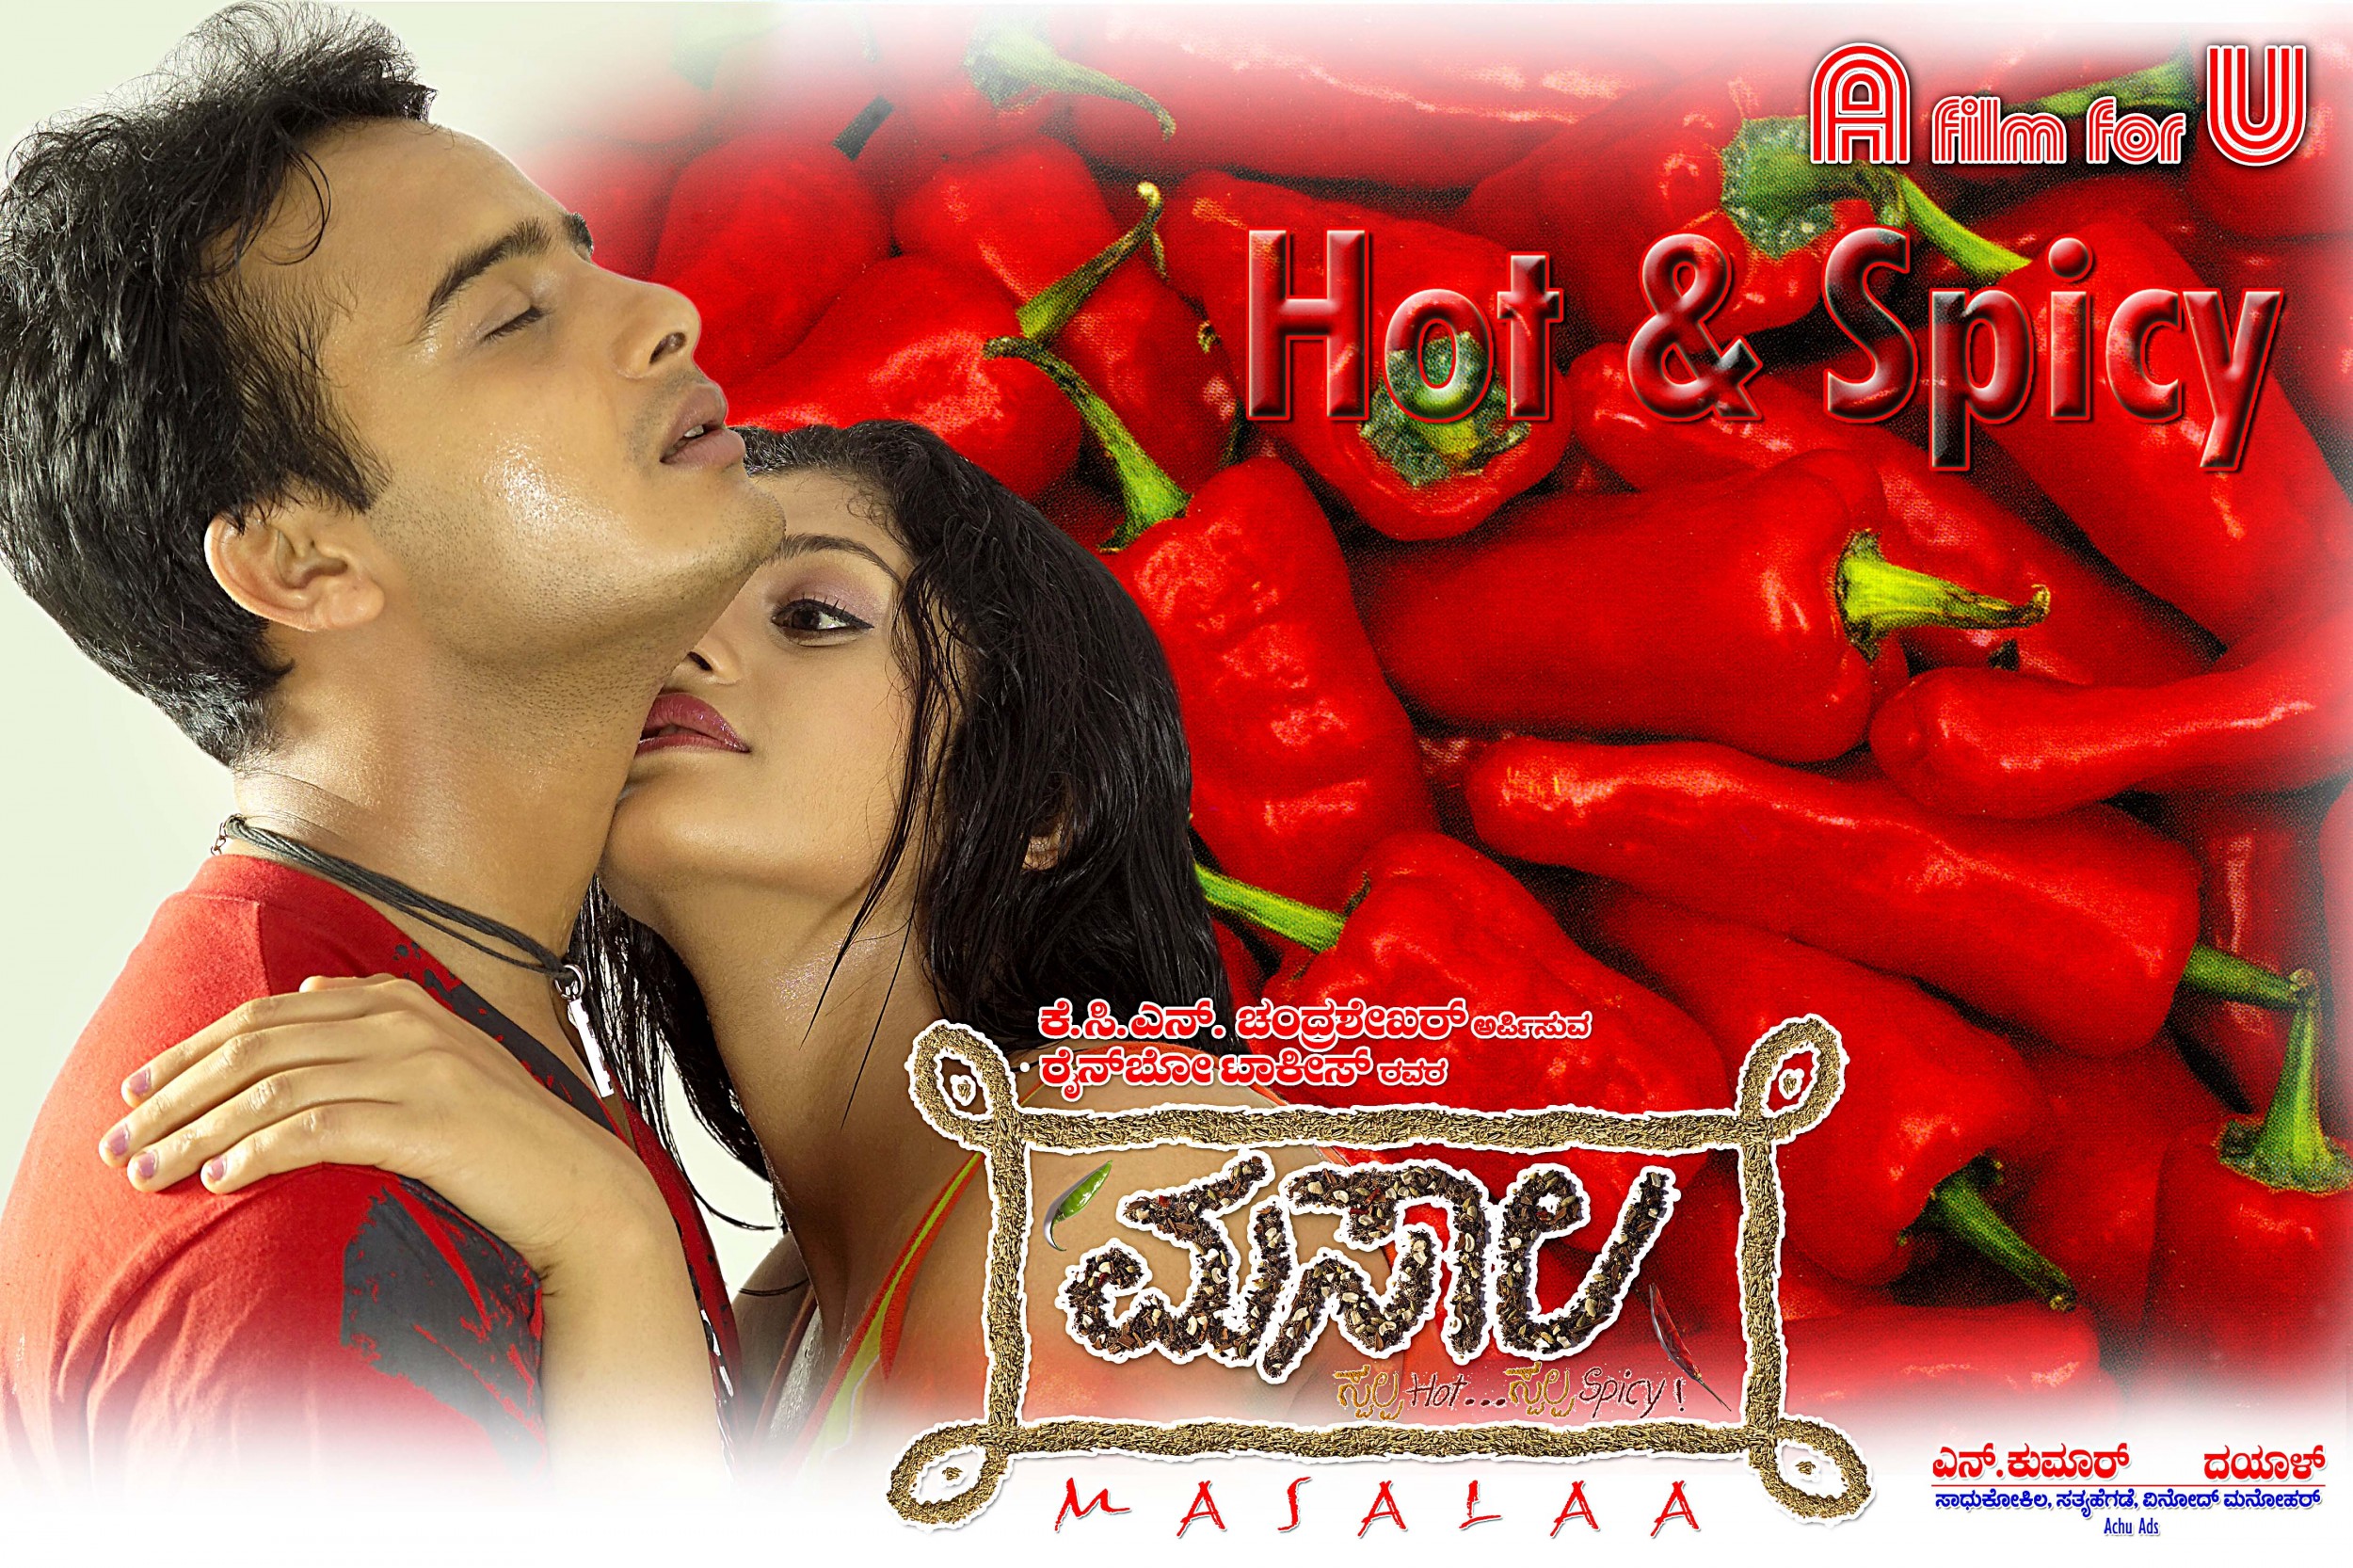 Mega Sized Movie Poster Image for Masalaa (#2 of 4)